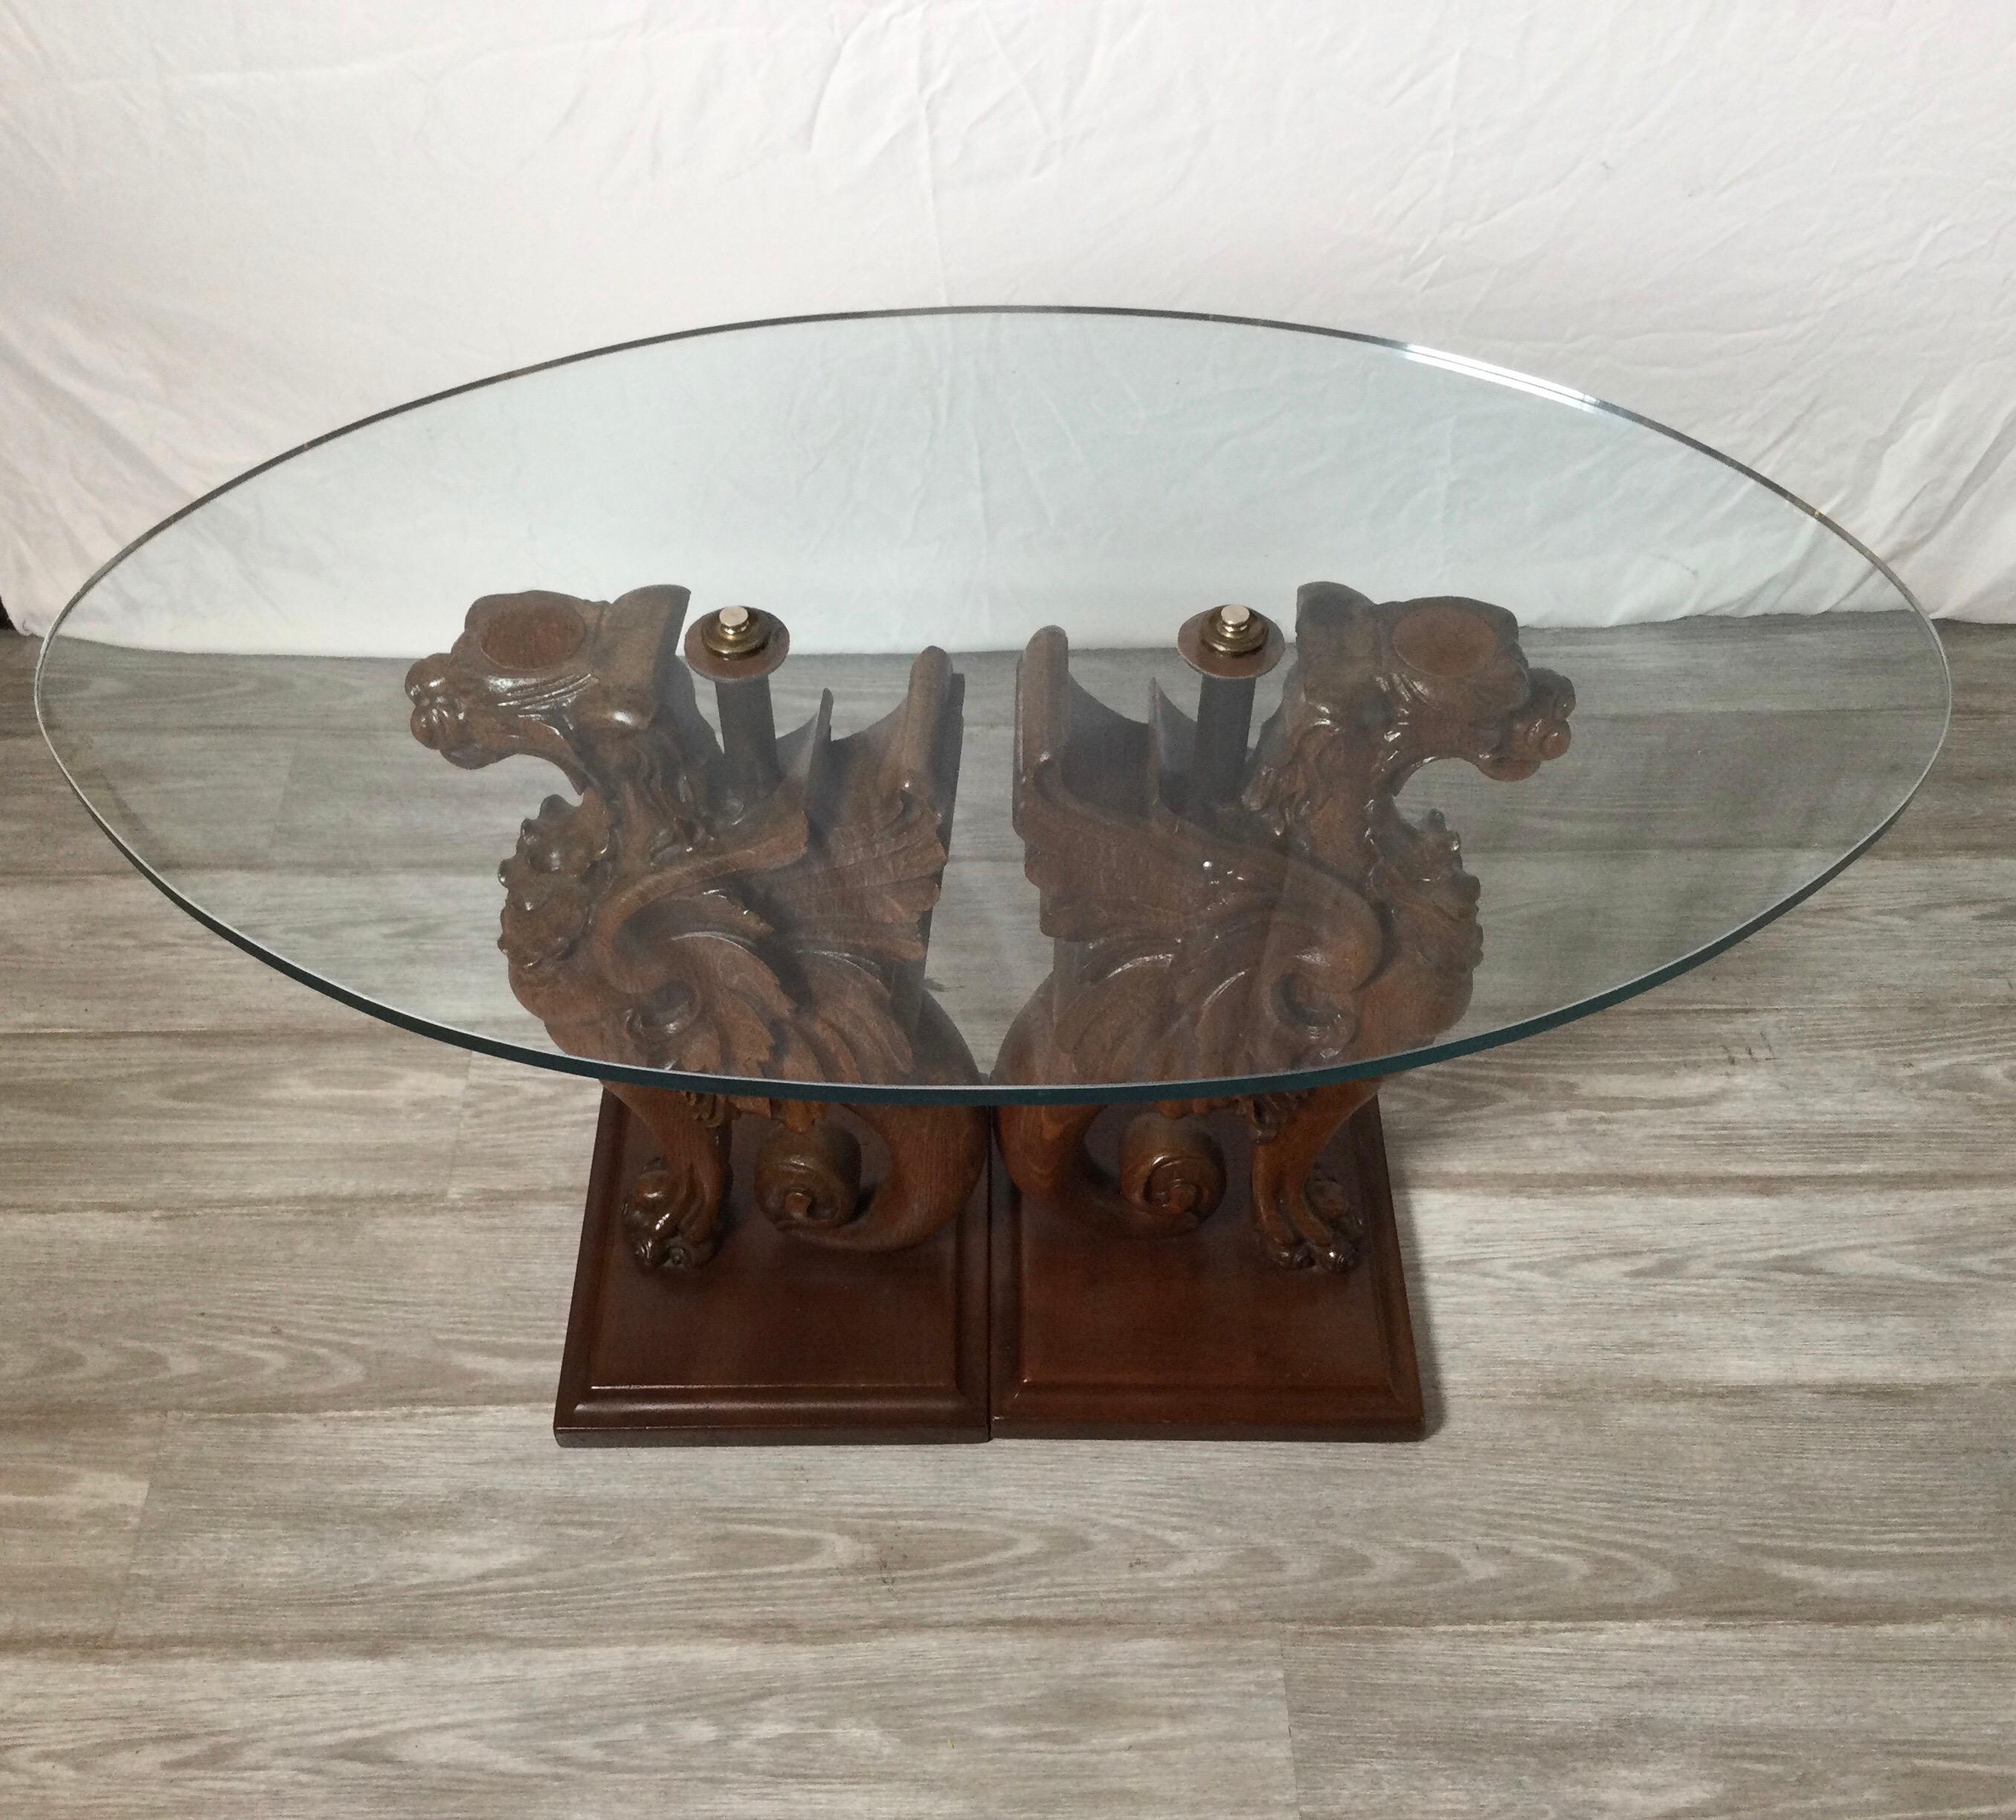 Circa 1900 hand carved oak griffin glass top low table, cocktail table
This unique size can be used as a cocktail table, side table or end table,
Dimensions: 35.50